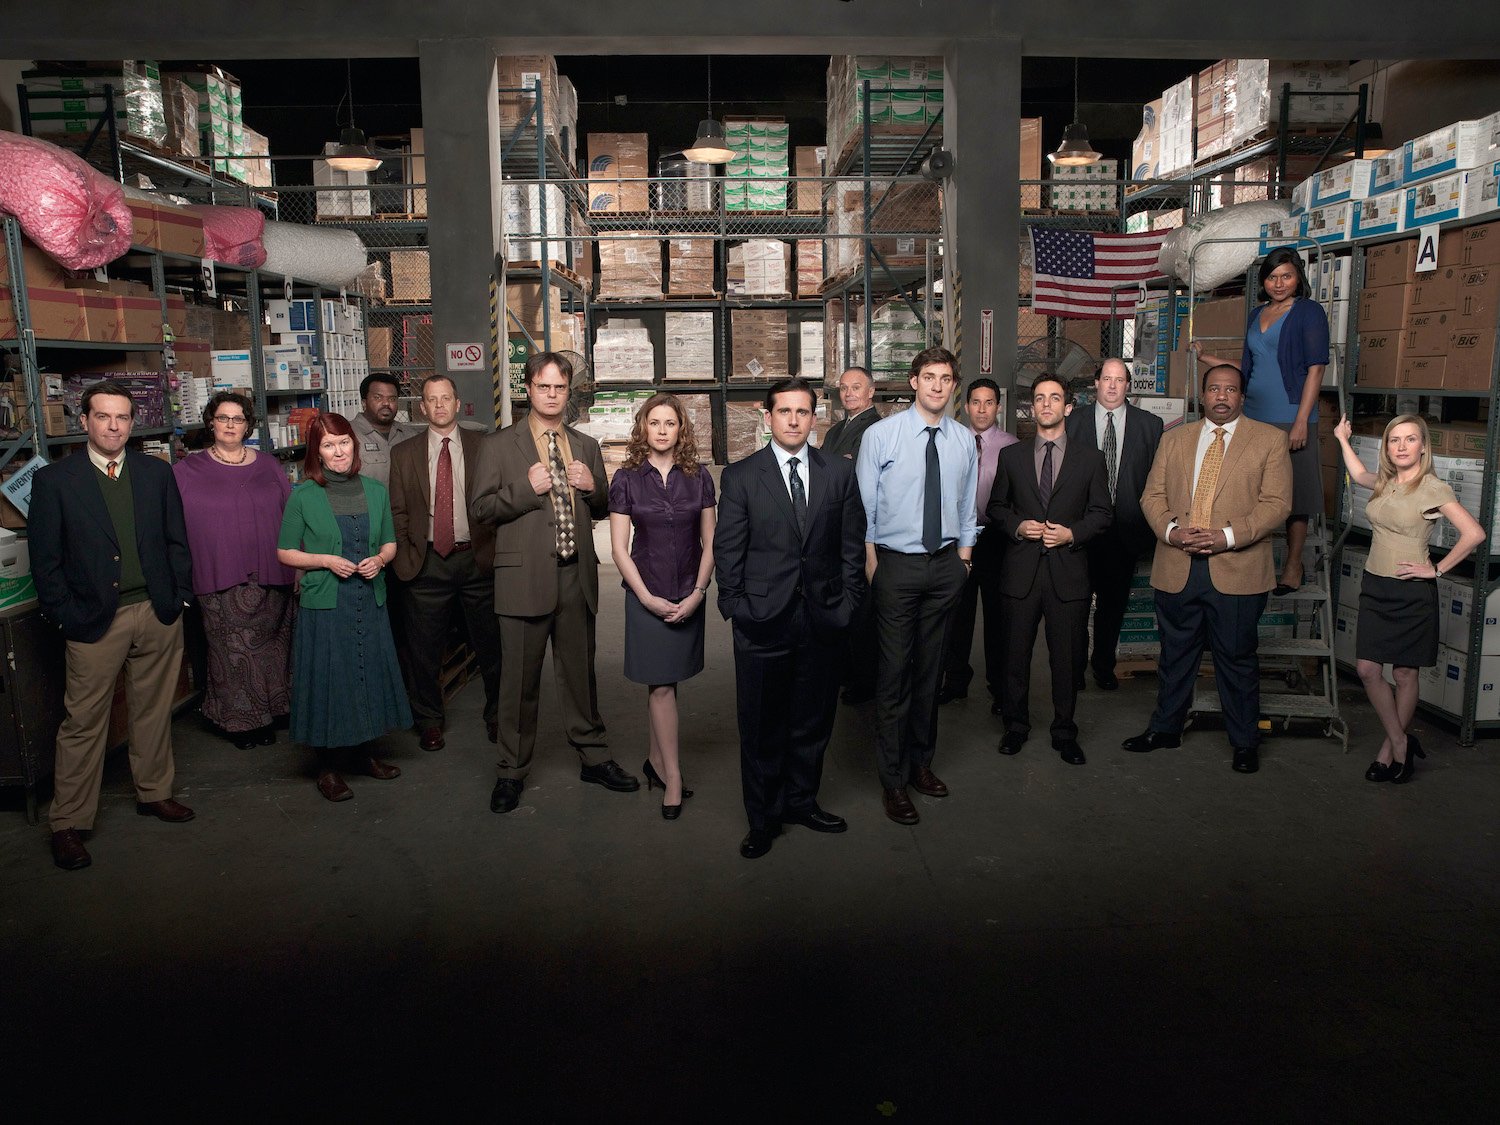 Cast of 'The Office' 